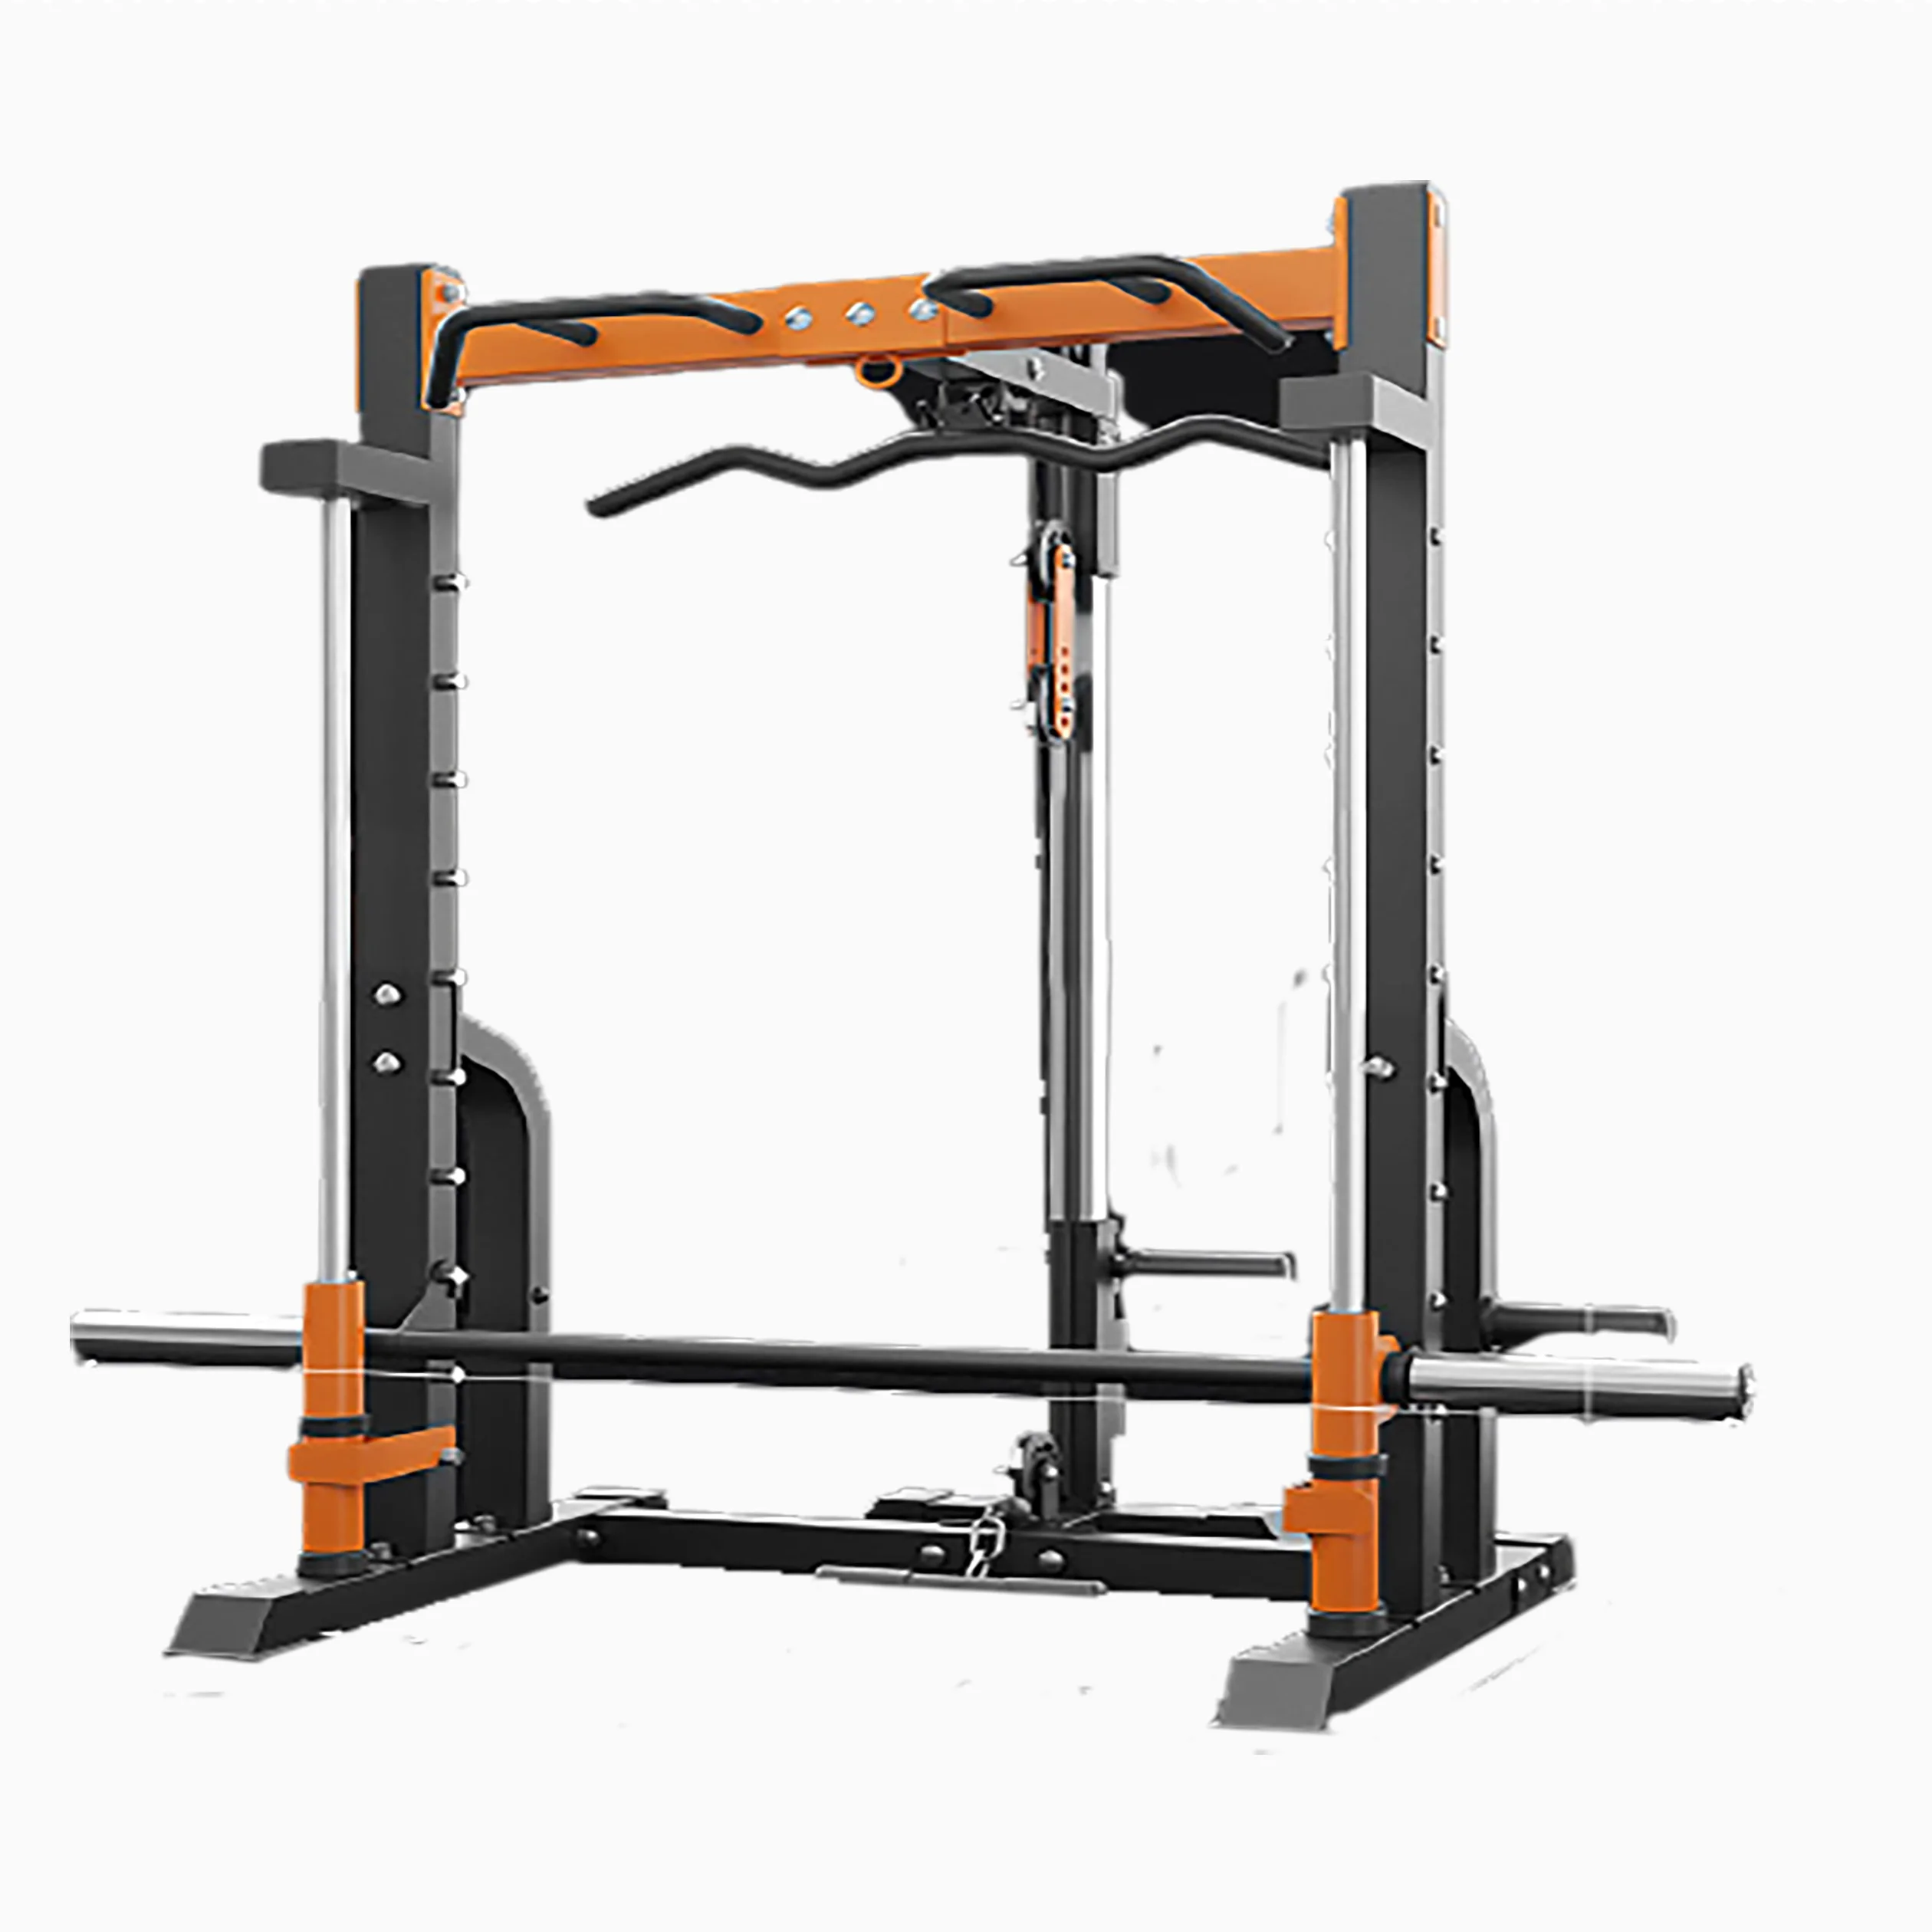 

Top 10 star supplier mutli functional squat rack home gym fitness equipment multi function station trainer, Yellow